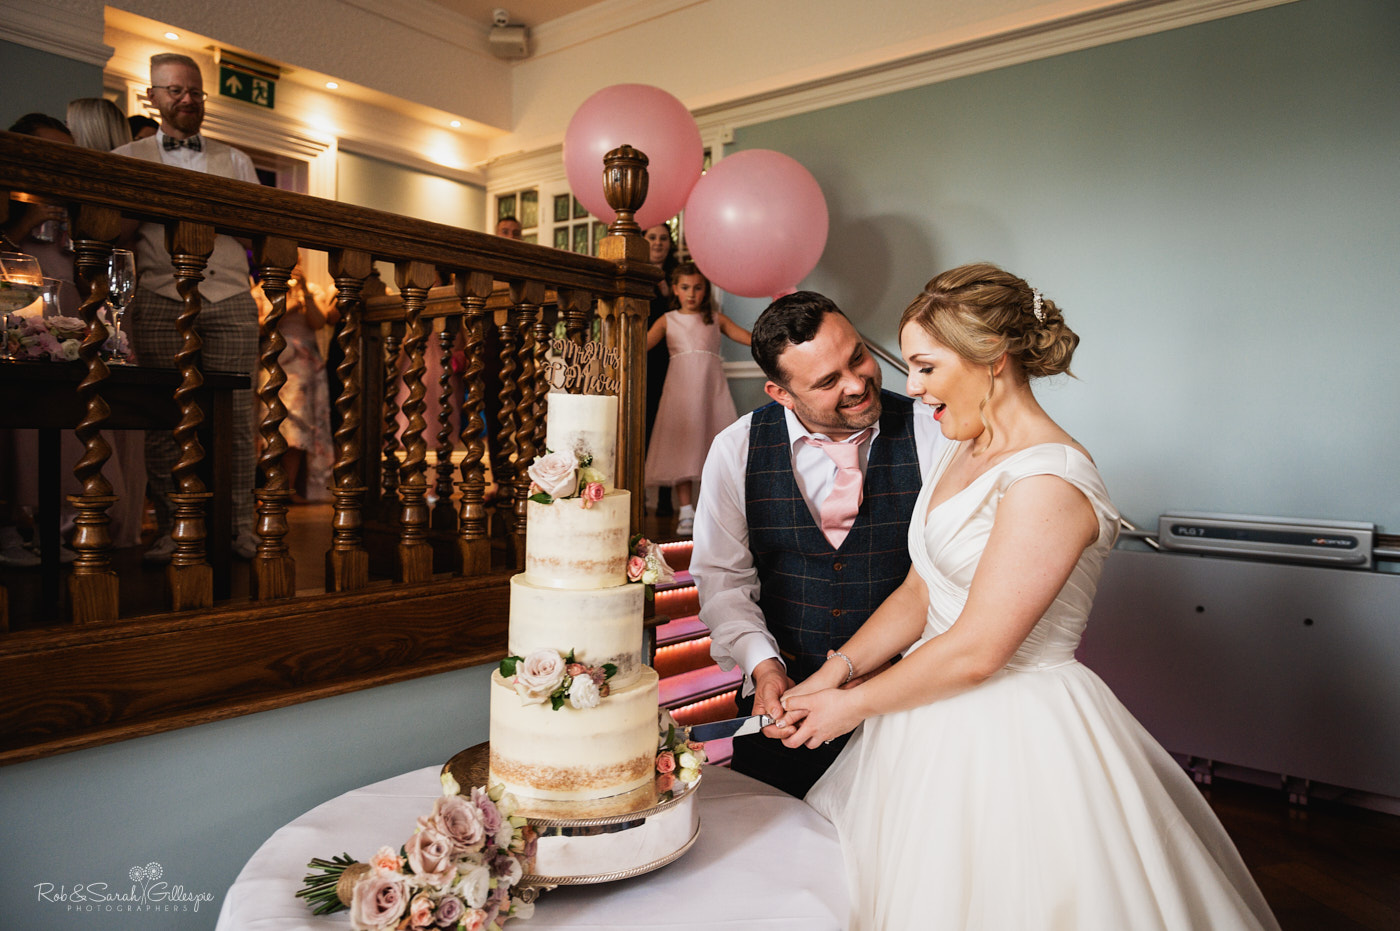 Bride and groom cut wedding cake at Pendrell Hall